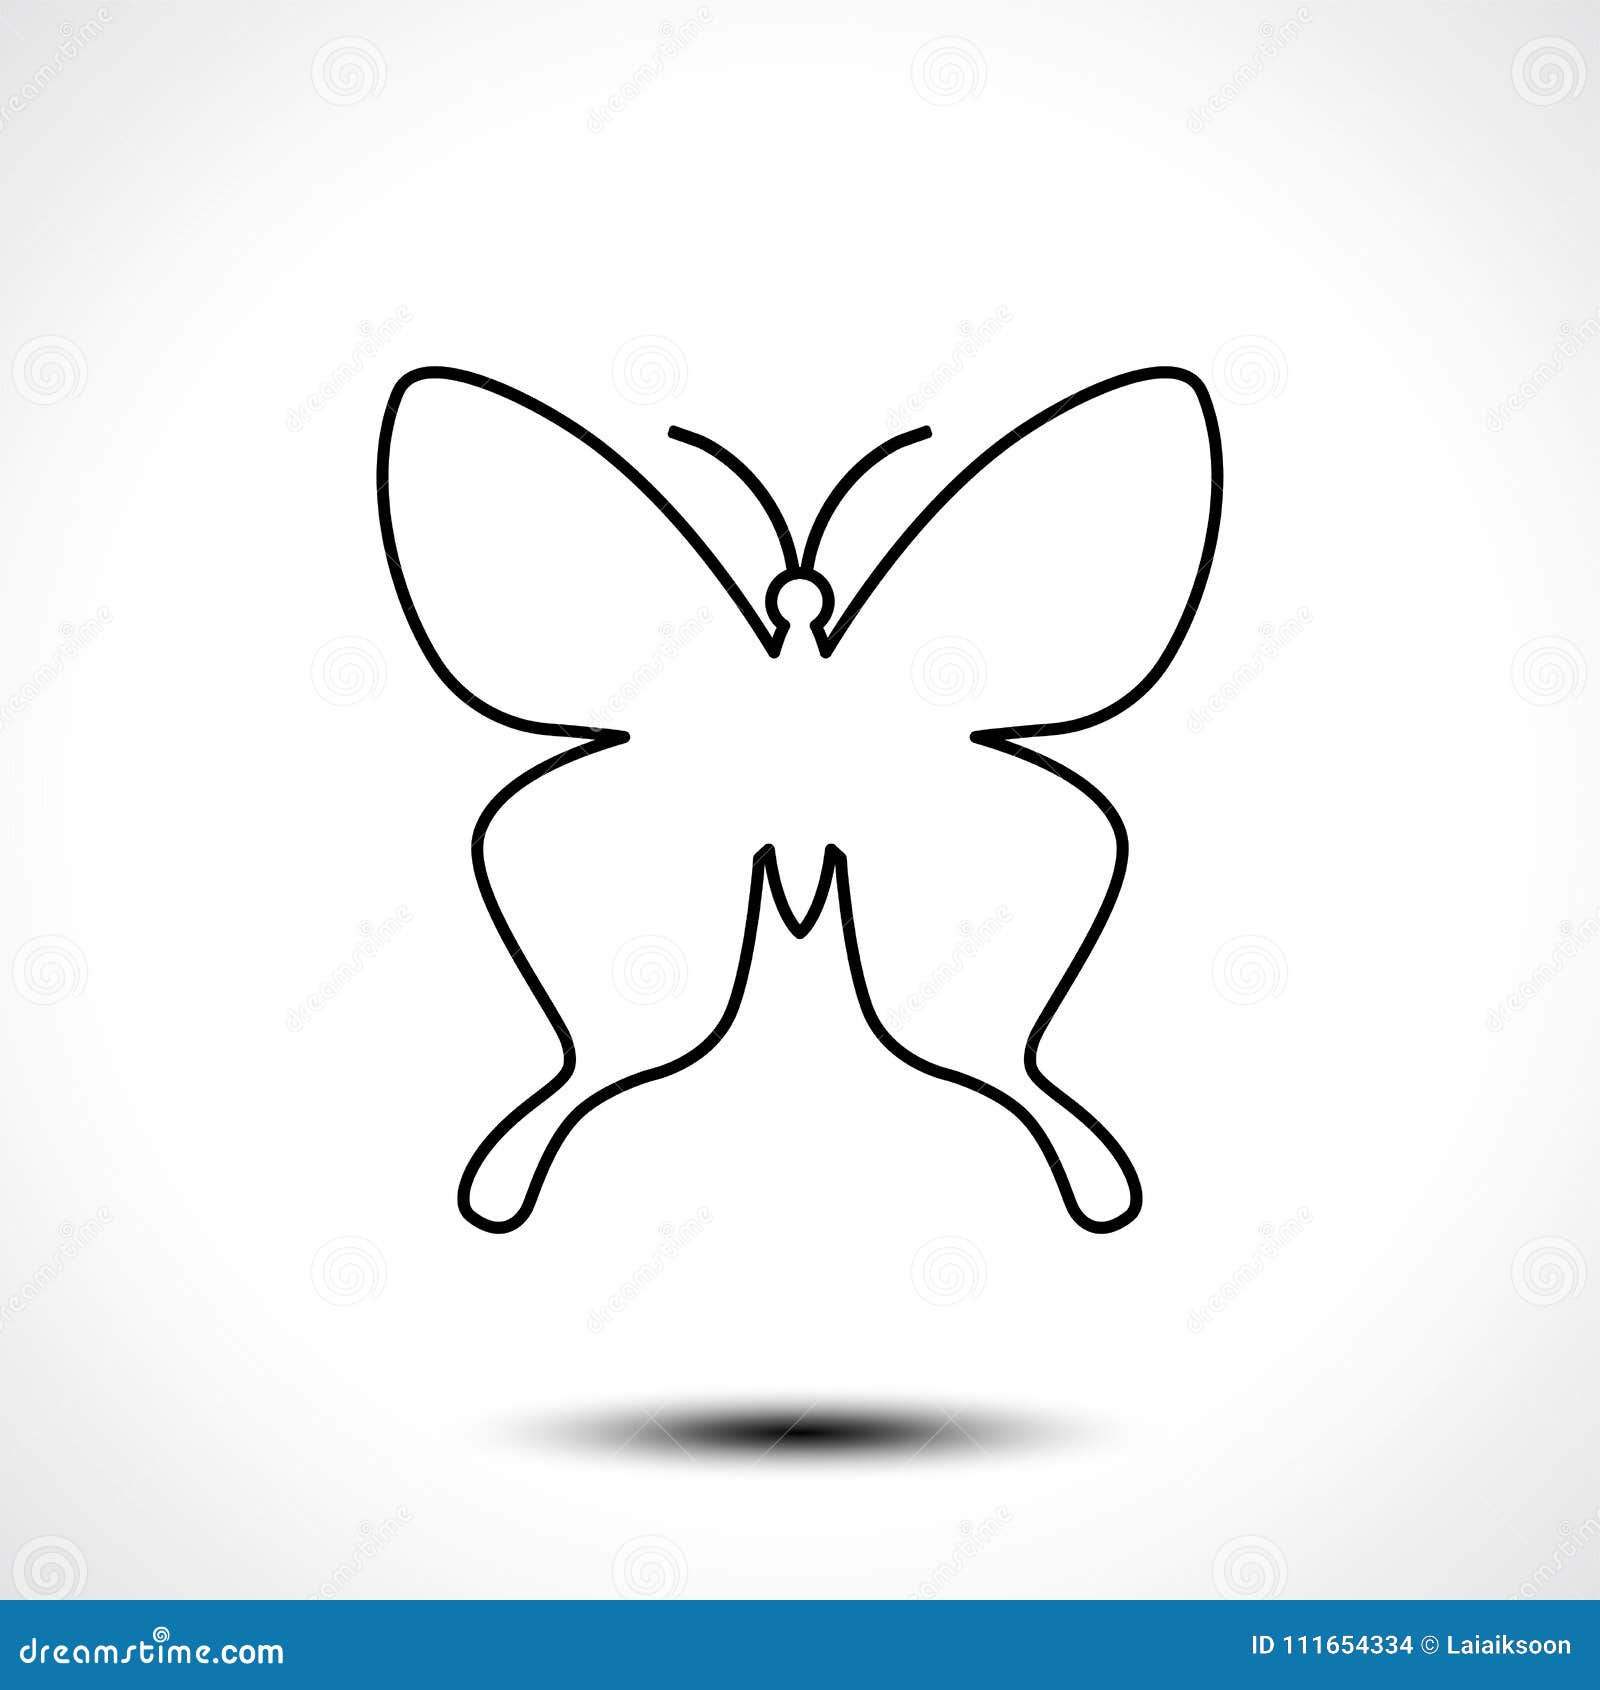 Butterfly Line Icon Isolated on White Background Stock Vector